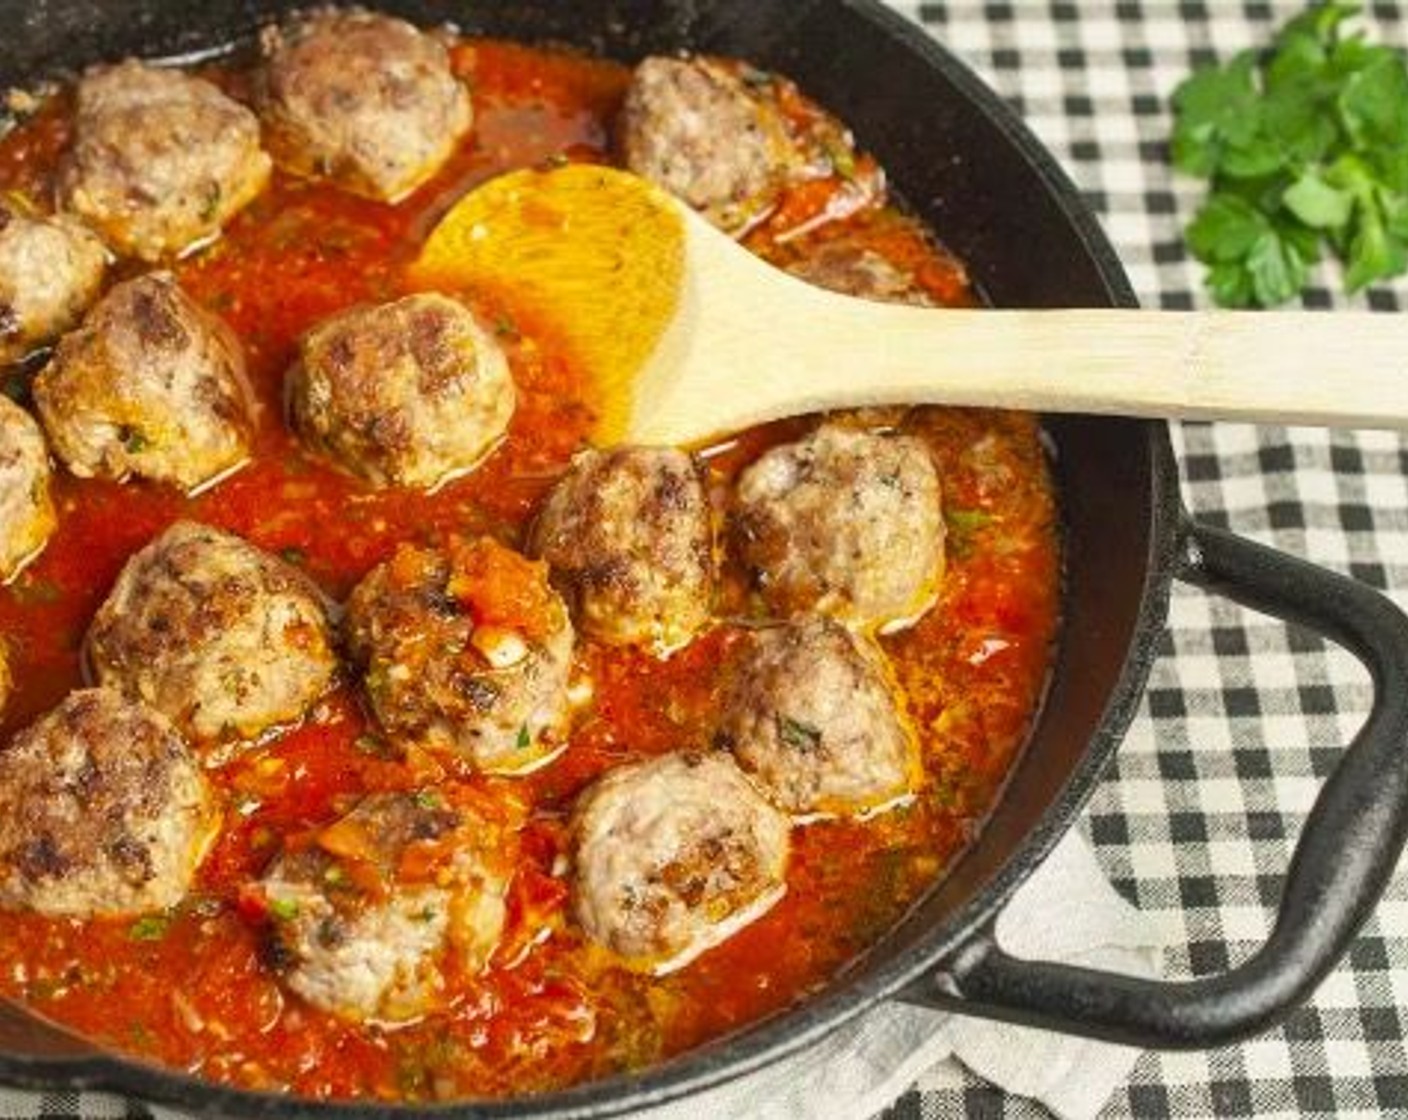 step 7 Using your hands, crush Canned Diced Tomatoes (1 1/2 cups) and add to skillet along with Fresh Oregano (1 Tbsp),  Paprika (3/4 tsp), and Ground Black Pepper (1/4 tsp), Stir to combine and bring to a simmer. Add meatballs back to pan, stirring to coat with sauce.